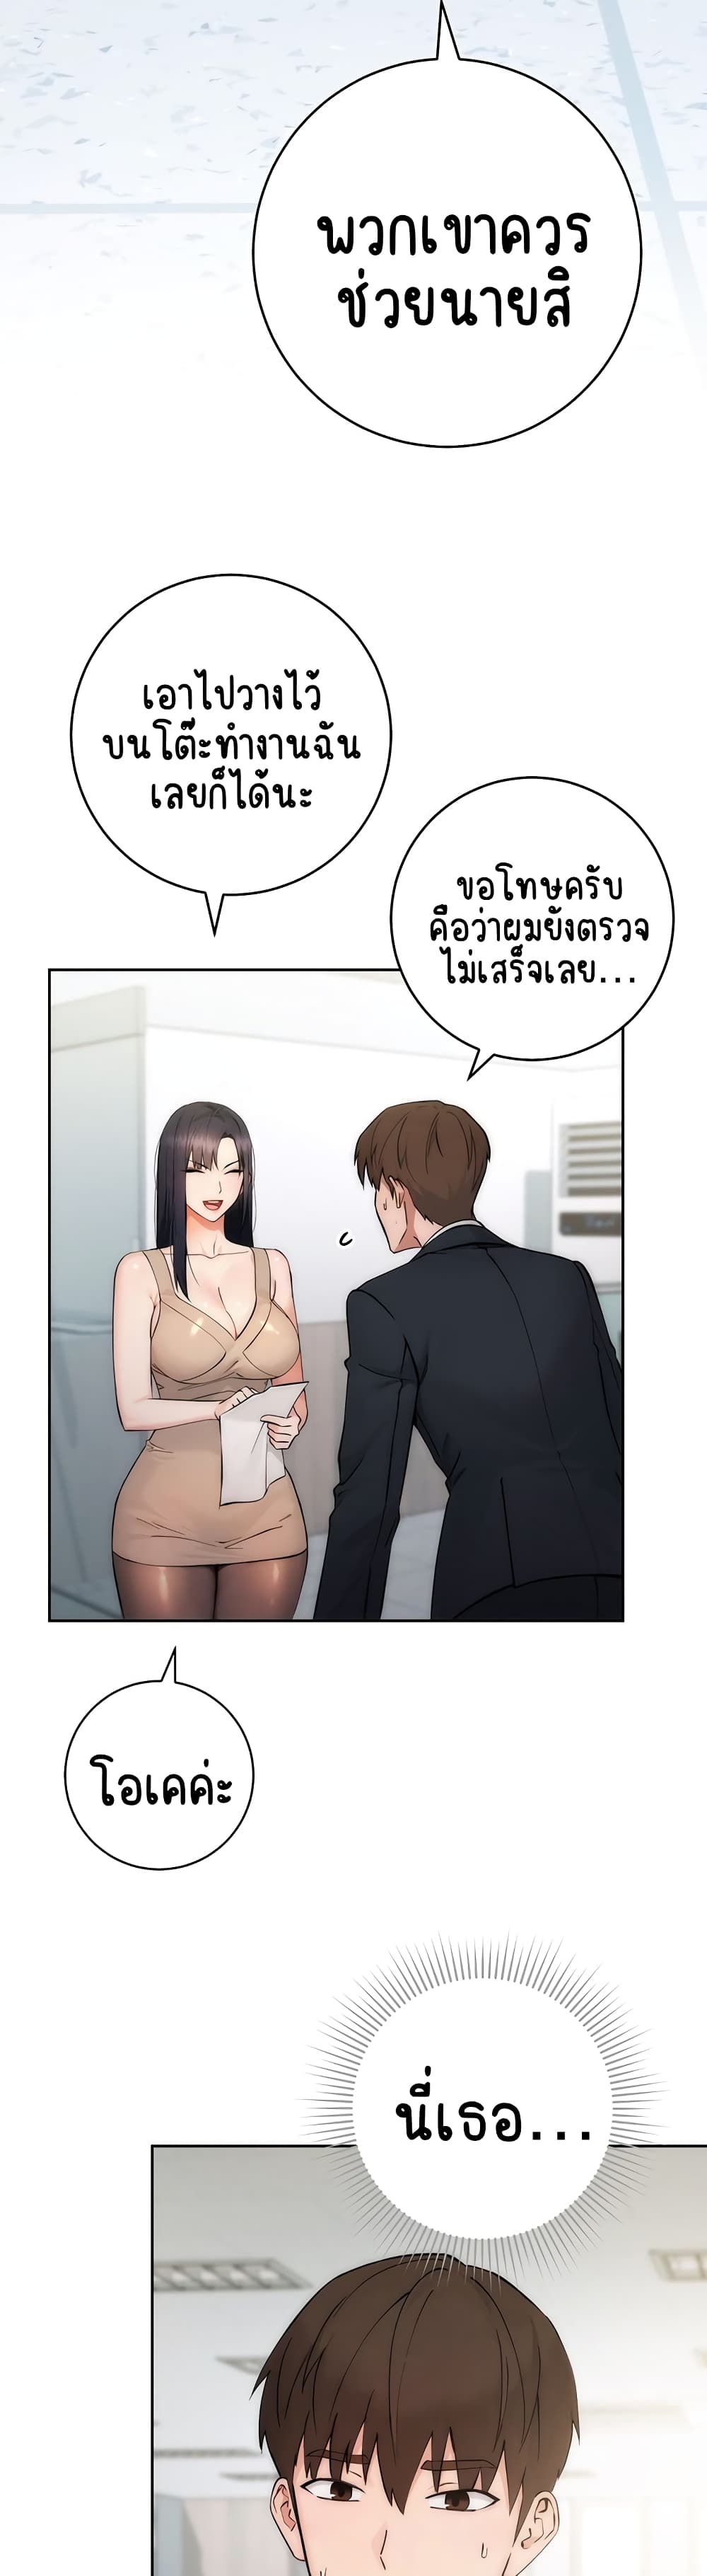 Outsider: The Invisible Man ตอนที่ 1 ภาพ 16